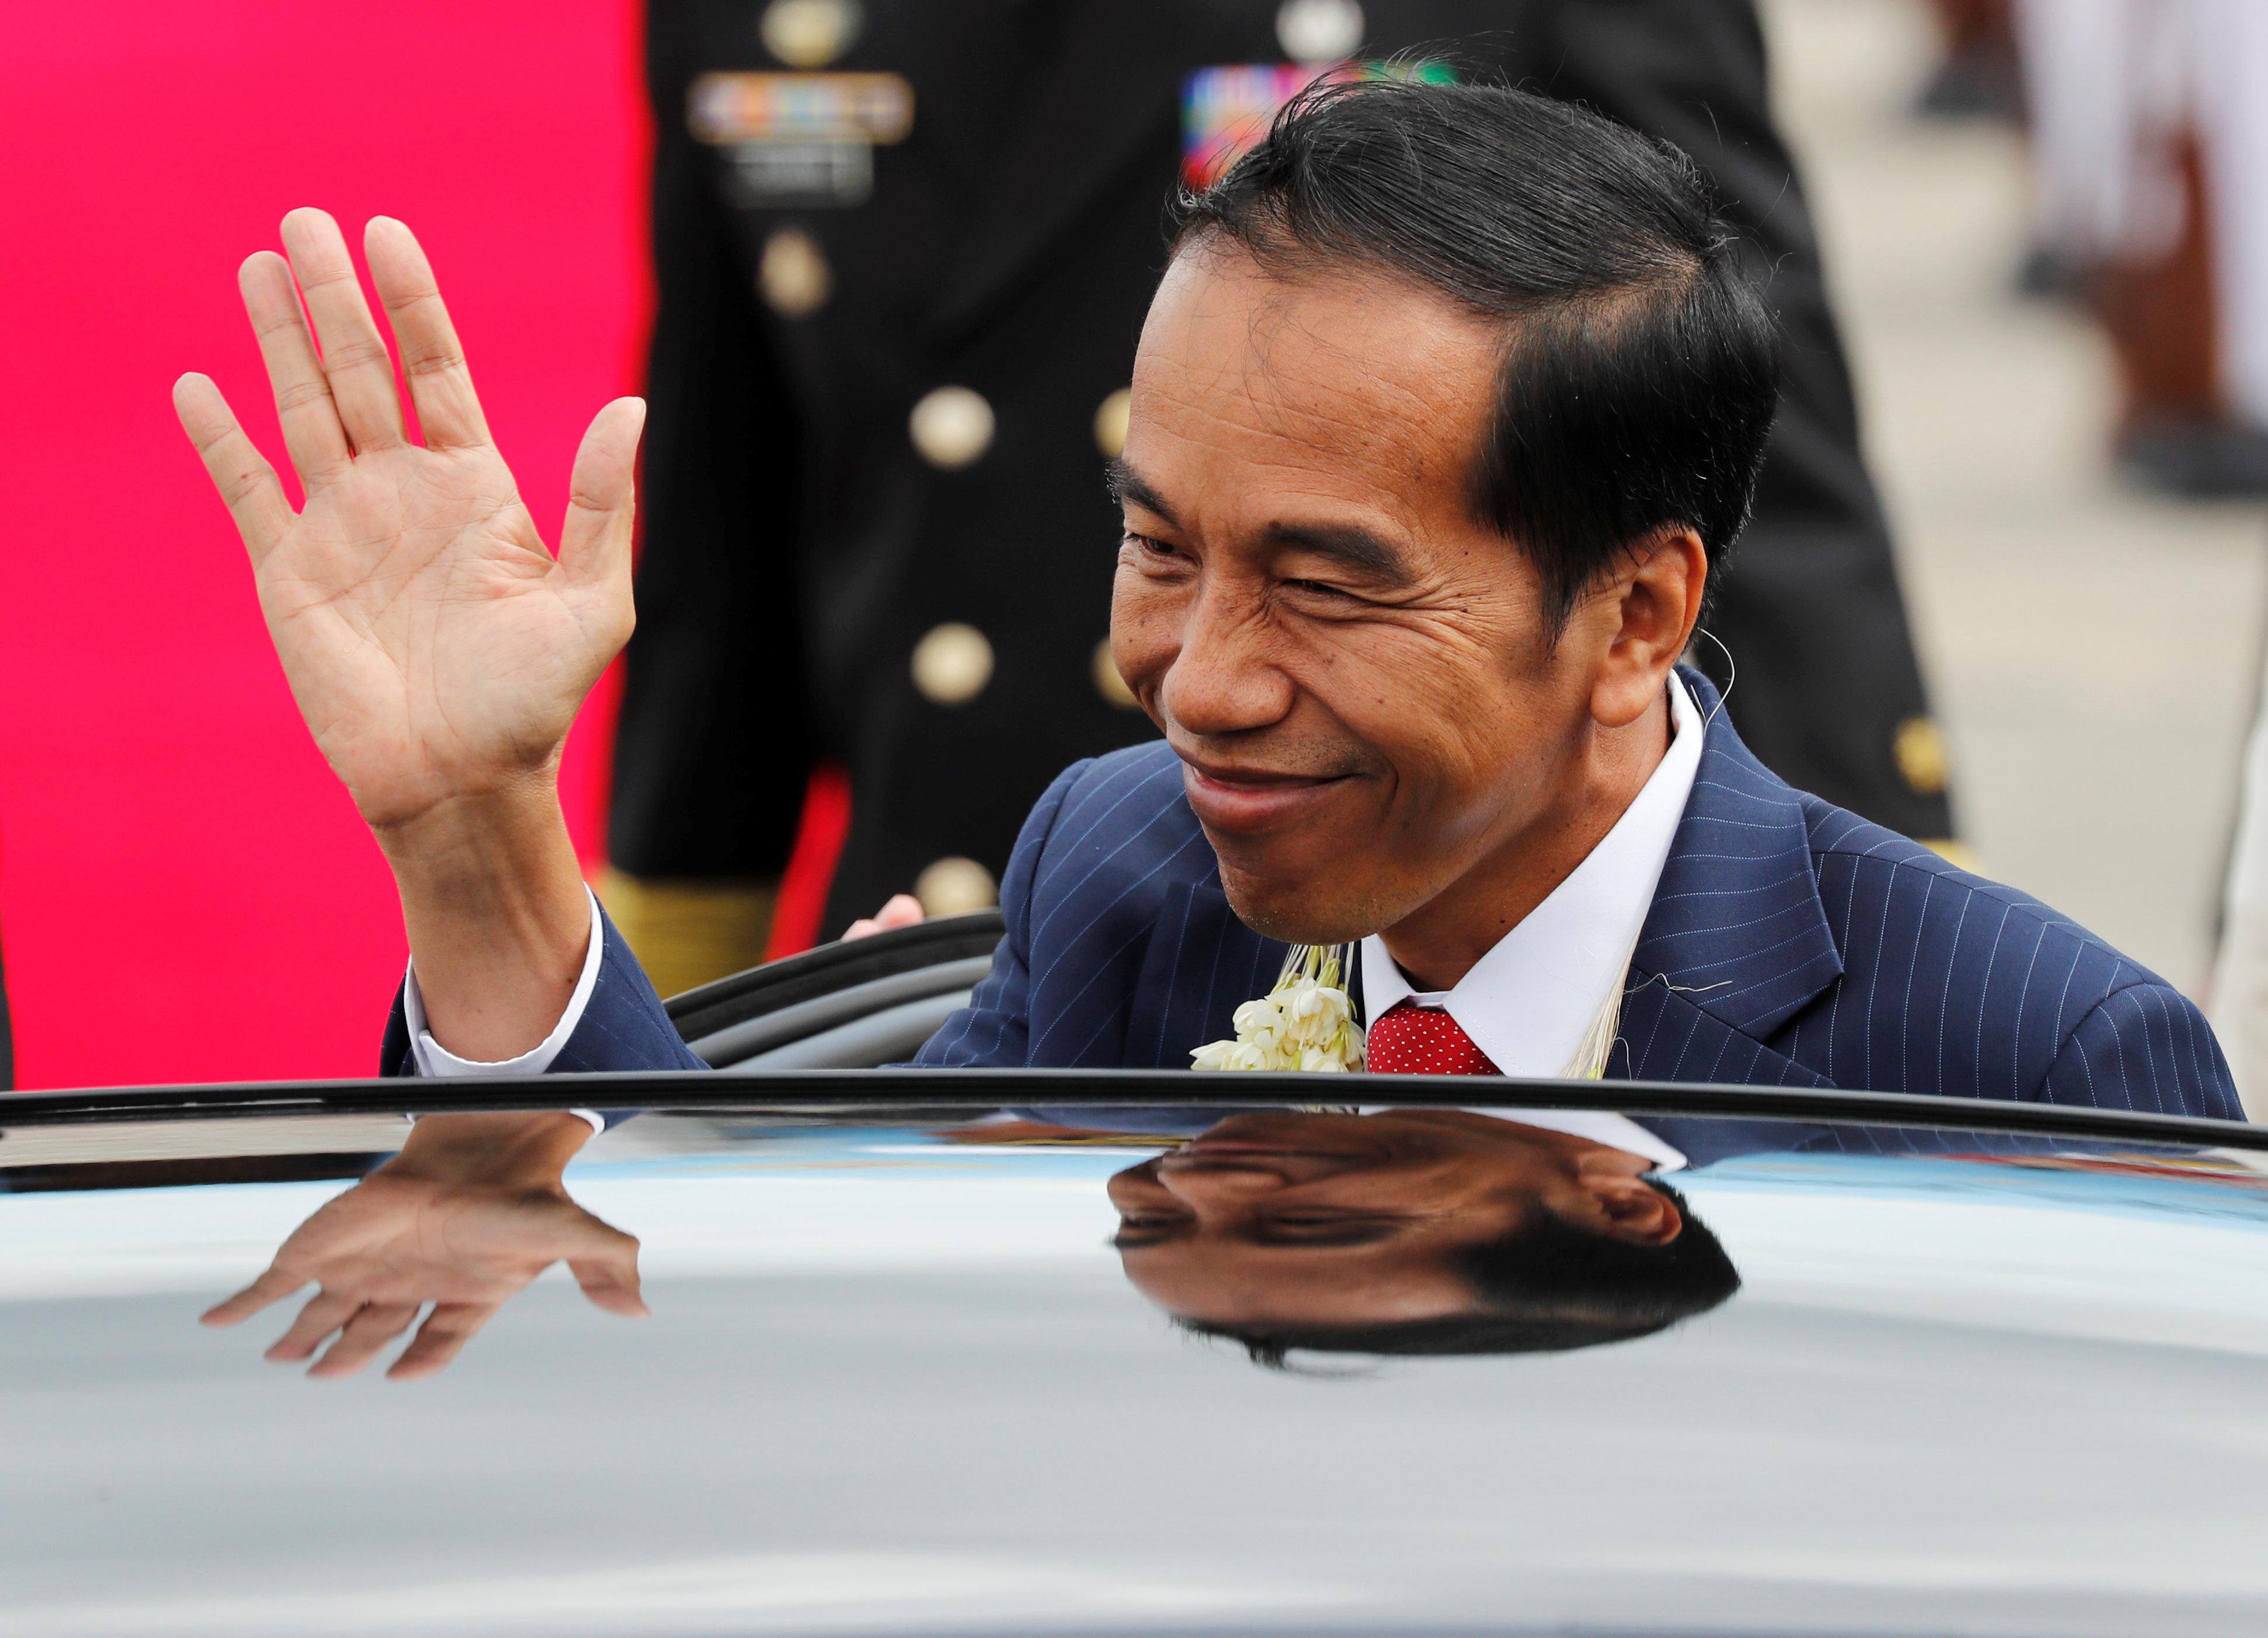 Indonesian President Jokowi receives country's first COVID-19 vaccine shot